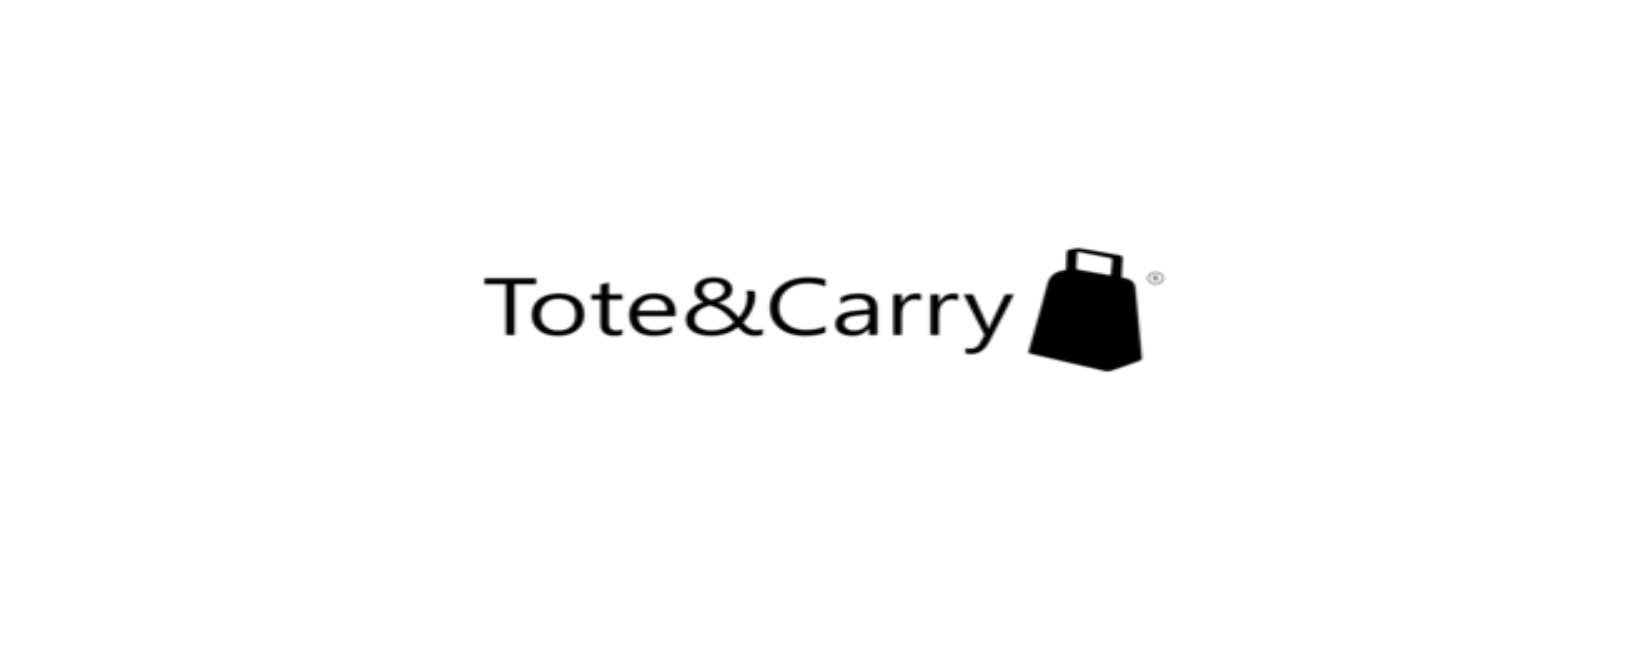 Tote&Carry Discount Code 2023